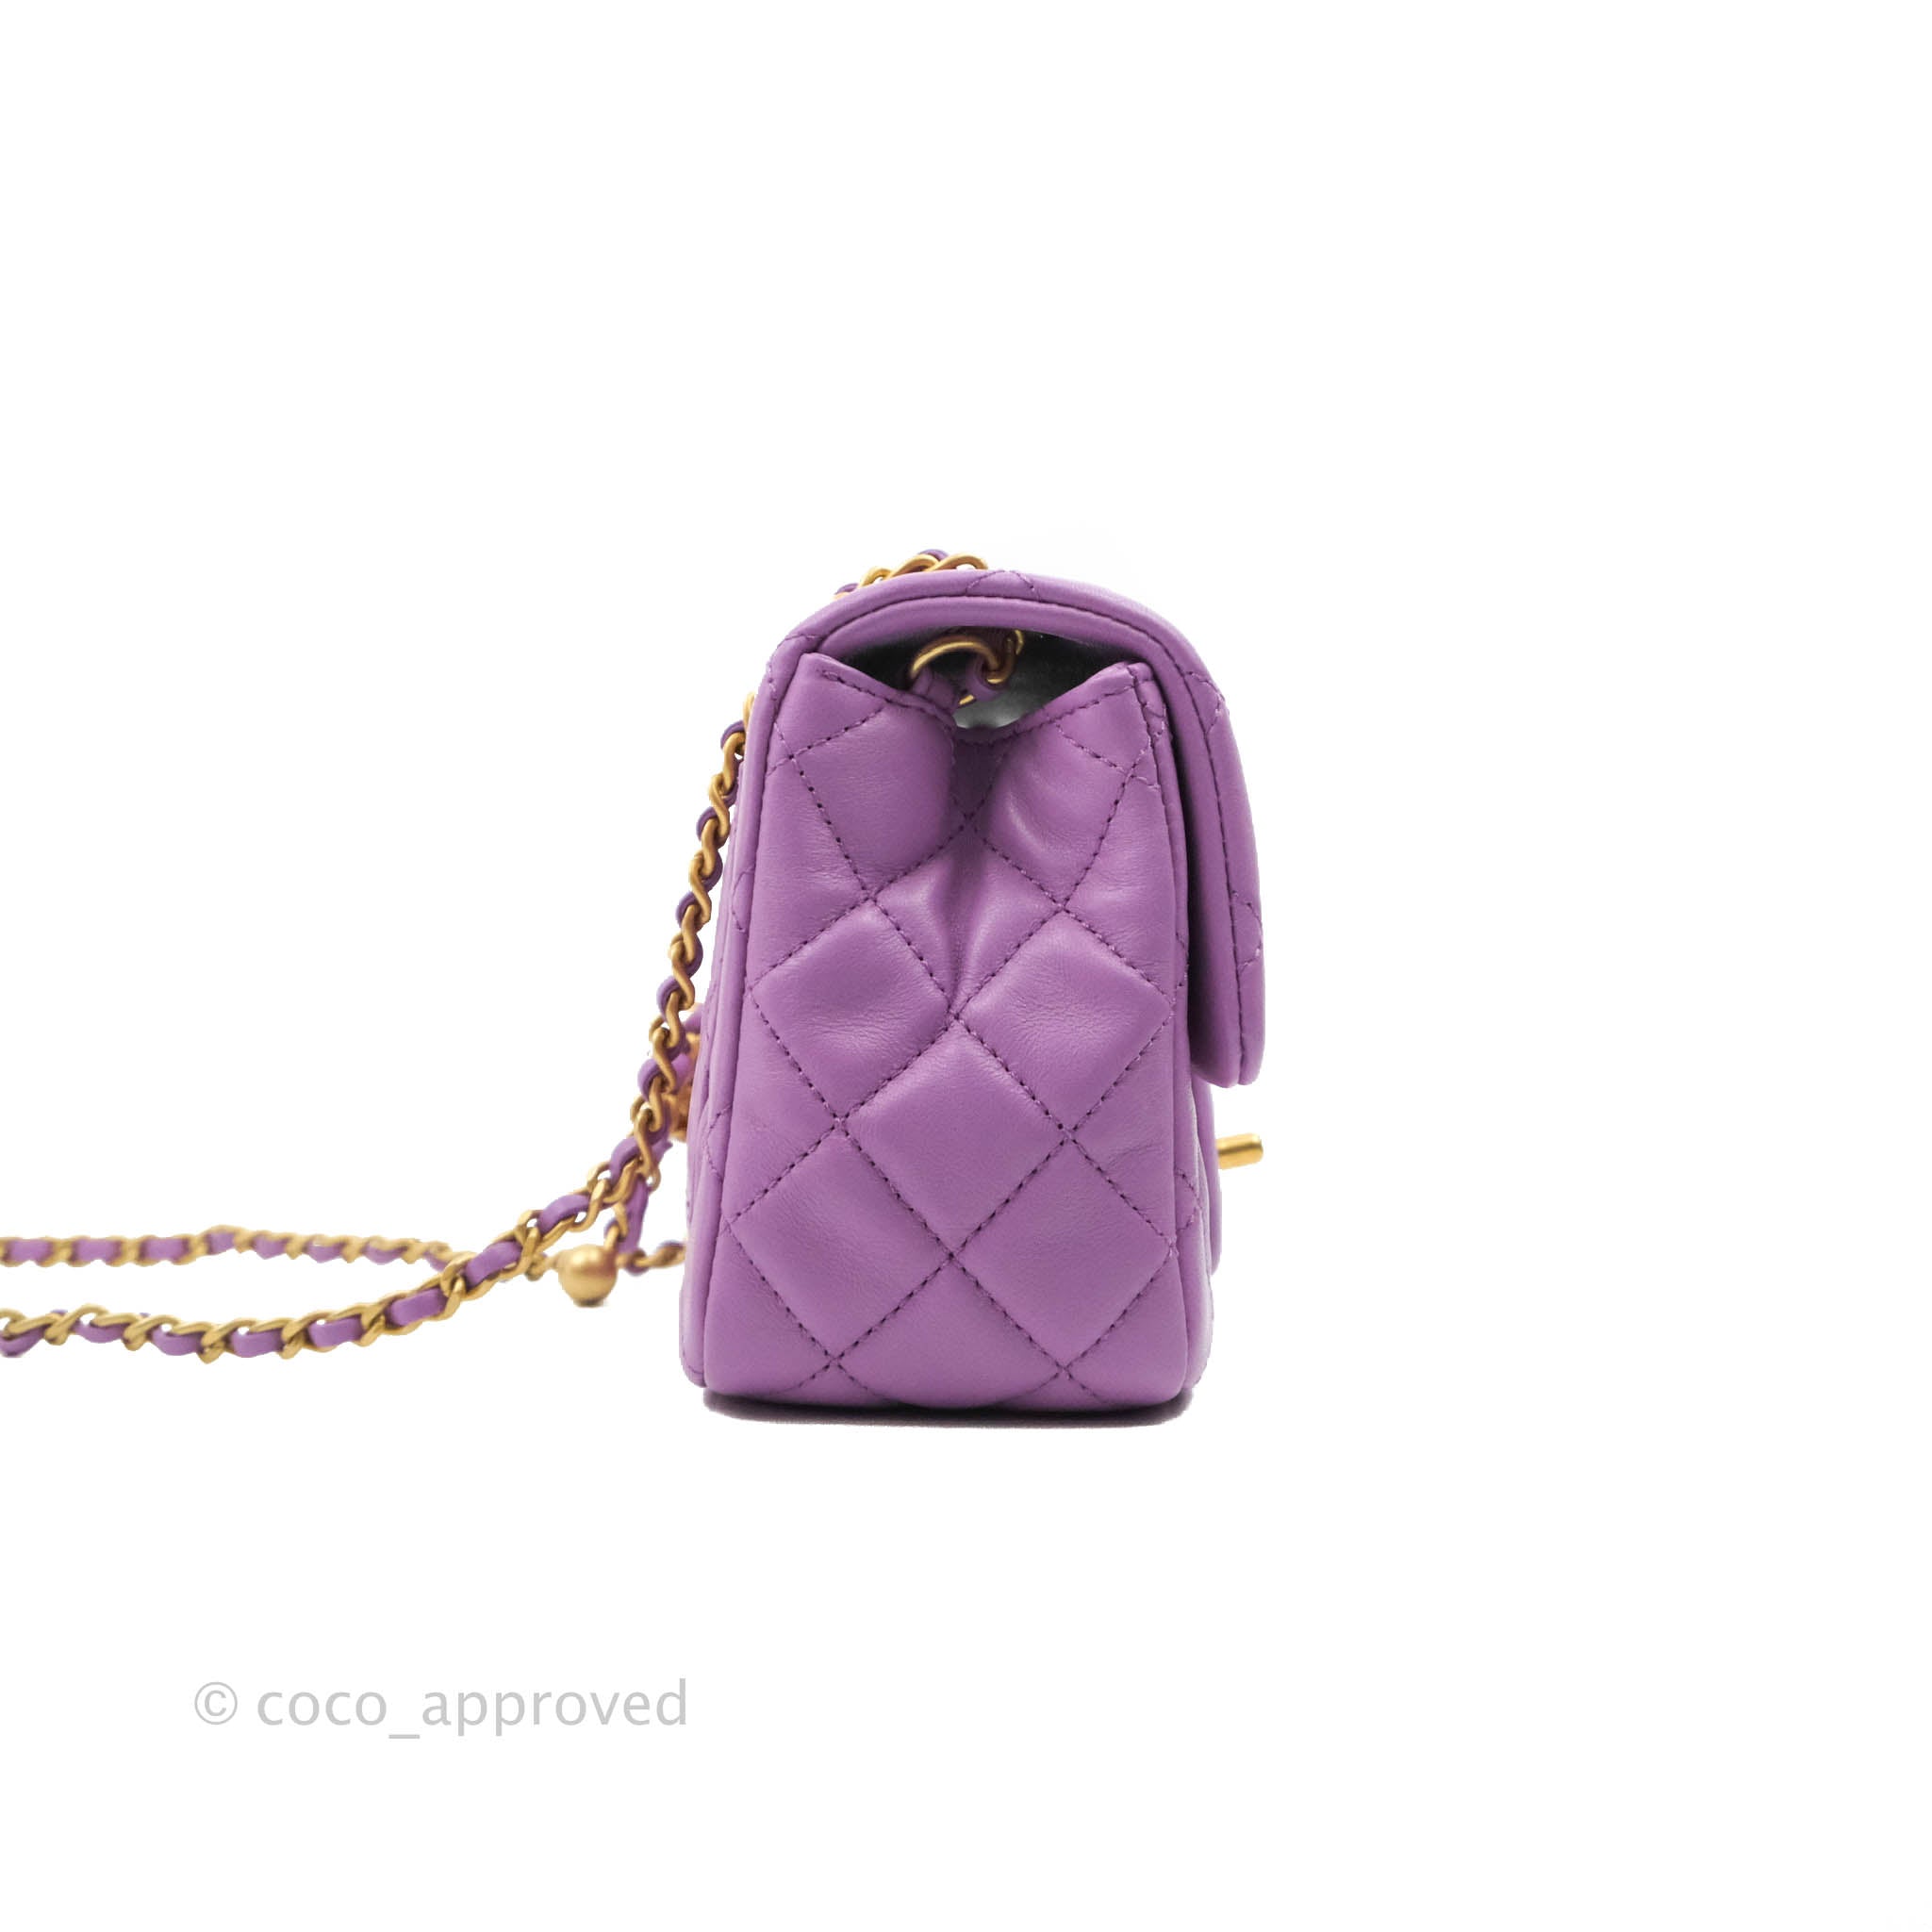 Chanel Purple Quilted Lambskin Mini Square Classic Flap Bag